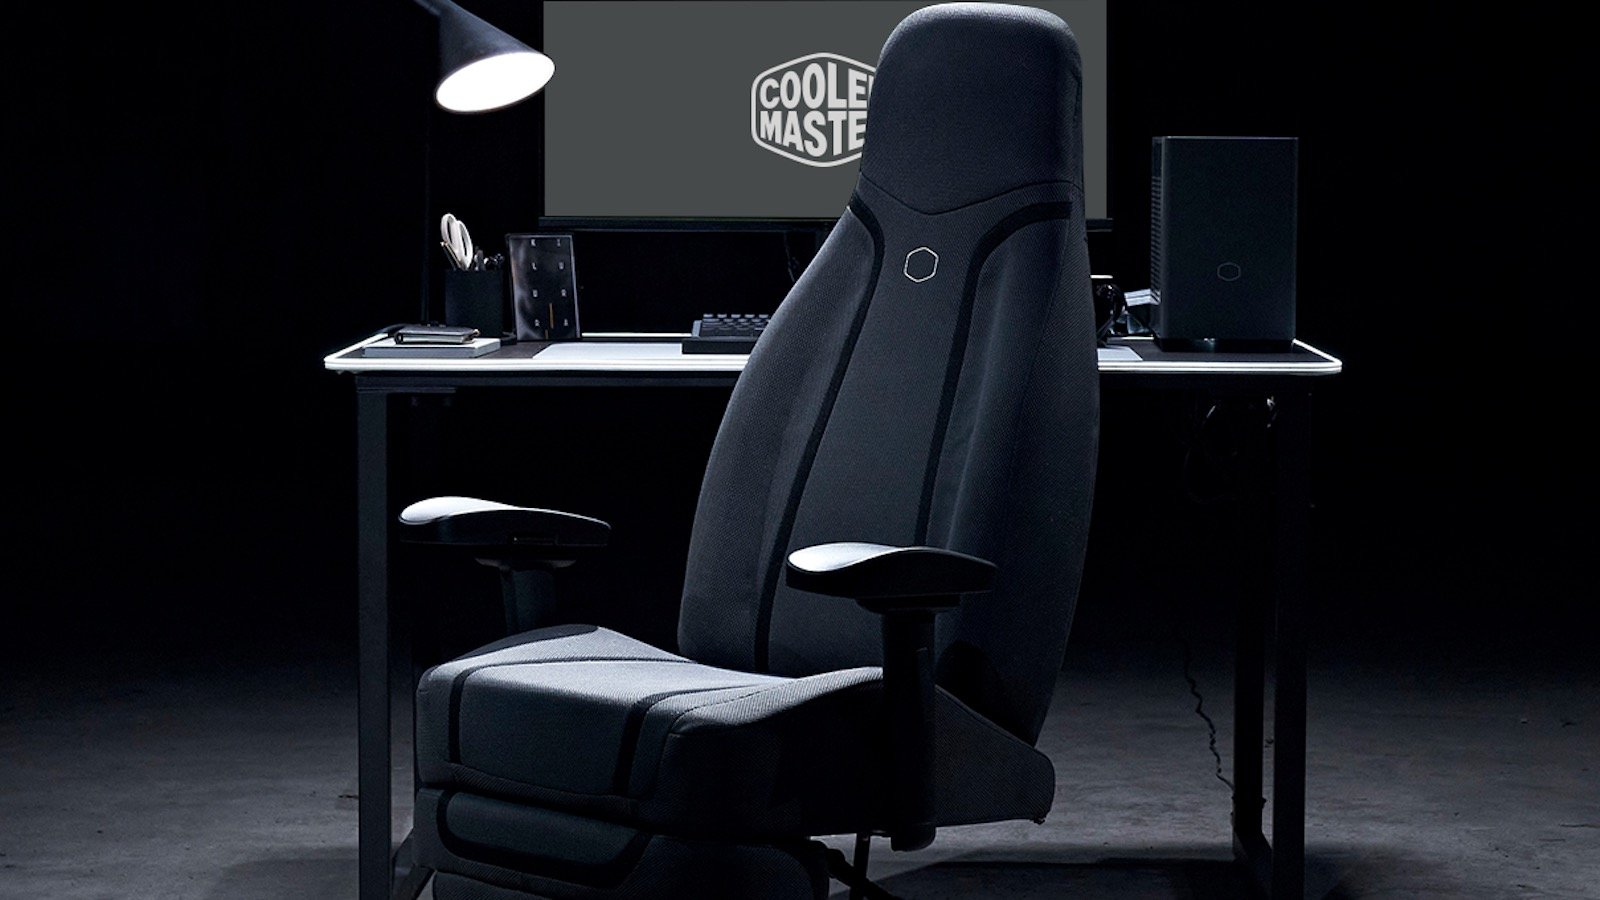 Cooler Master Synk X cross-platform haptic chair blends entertainment with technology